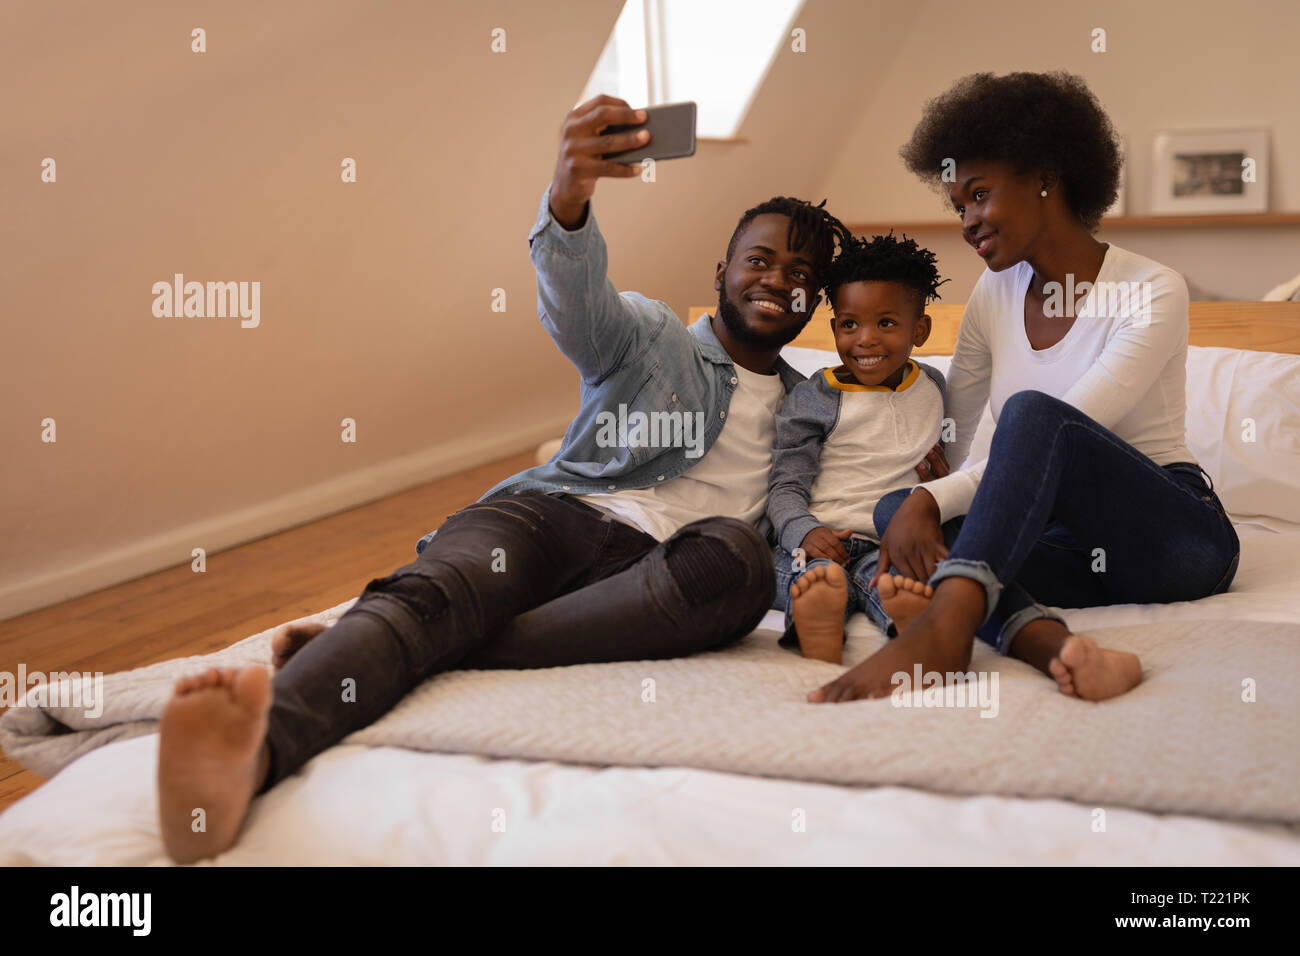 Family sitting together and taking selfie at home Stock Photo